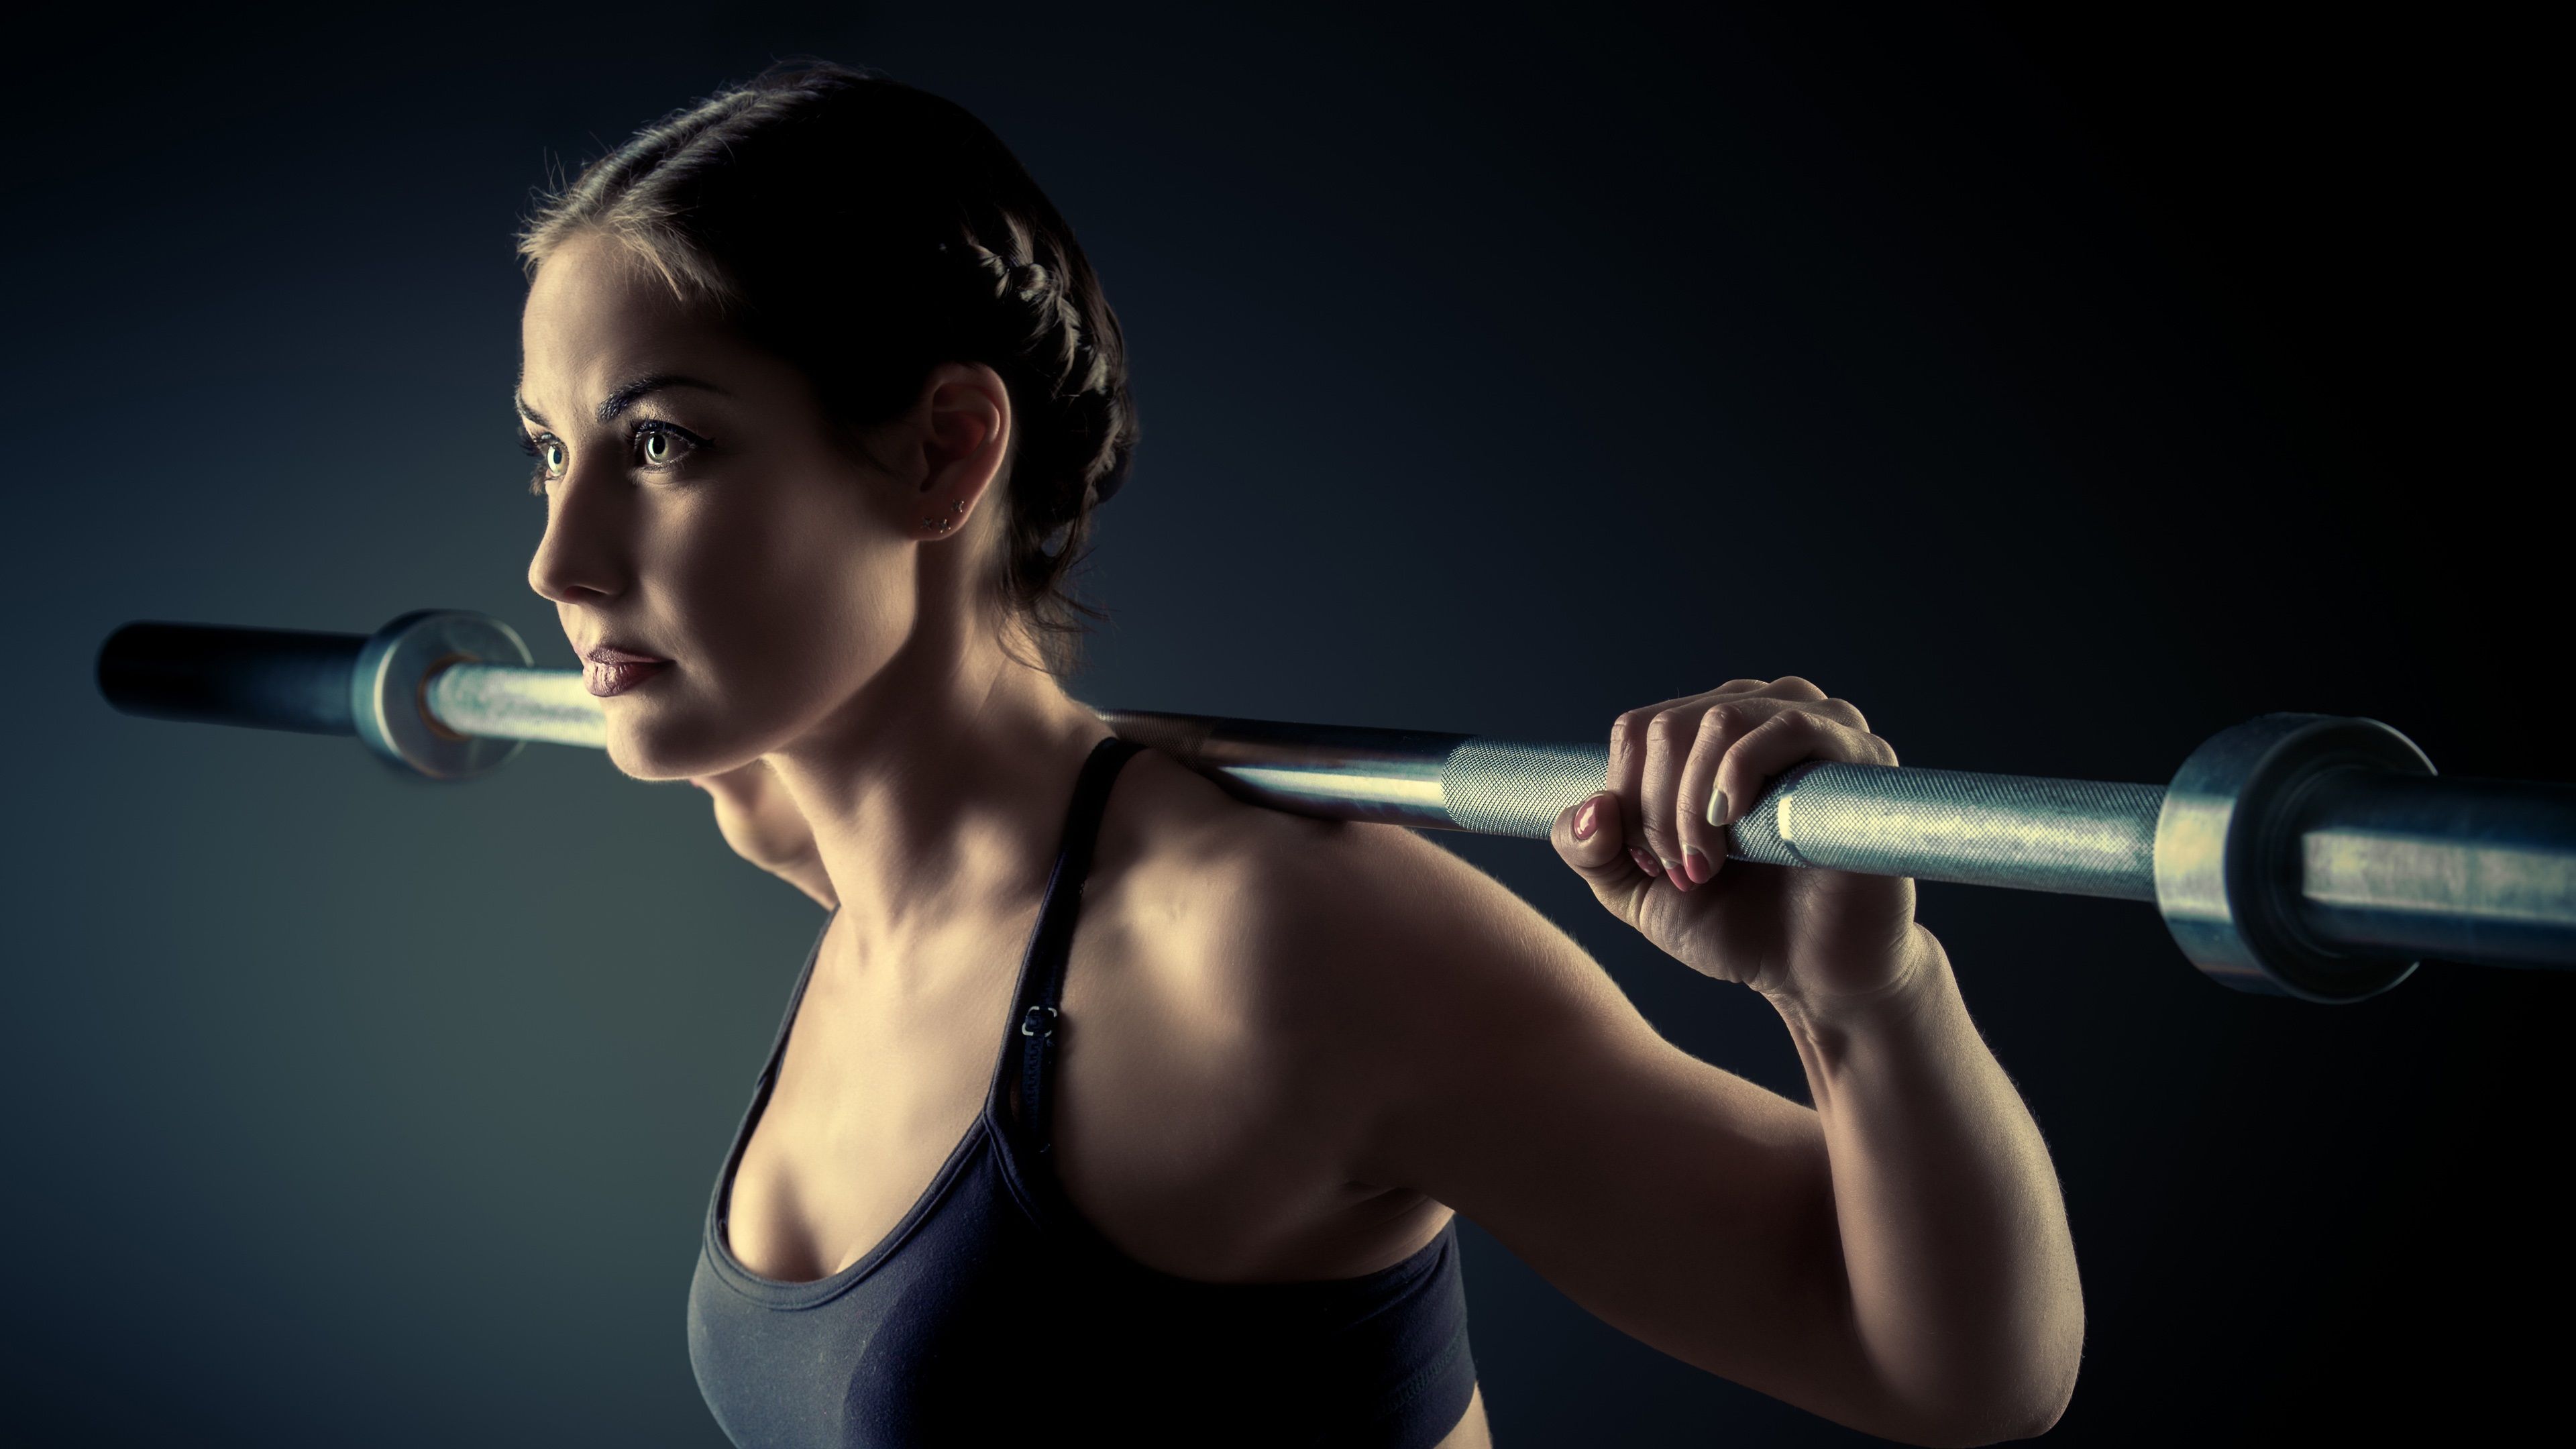 Wallpaper Fitness girl, black sportswear, training, weight lifting 3840x2160 UHD 4K Picture, Image